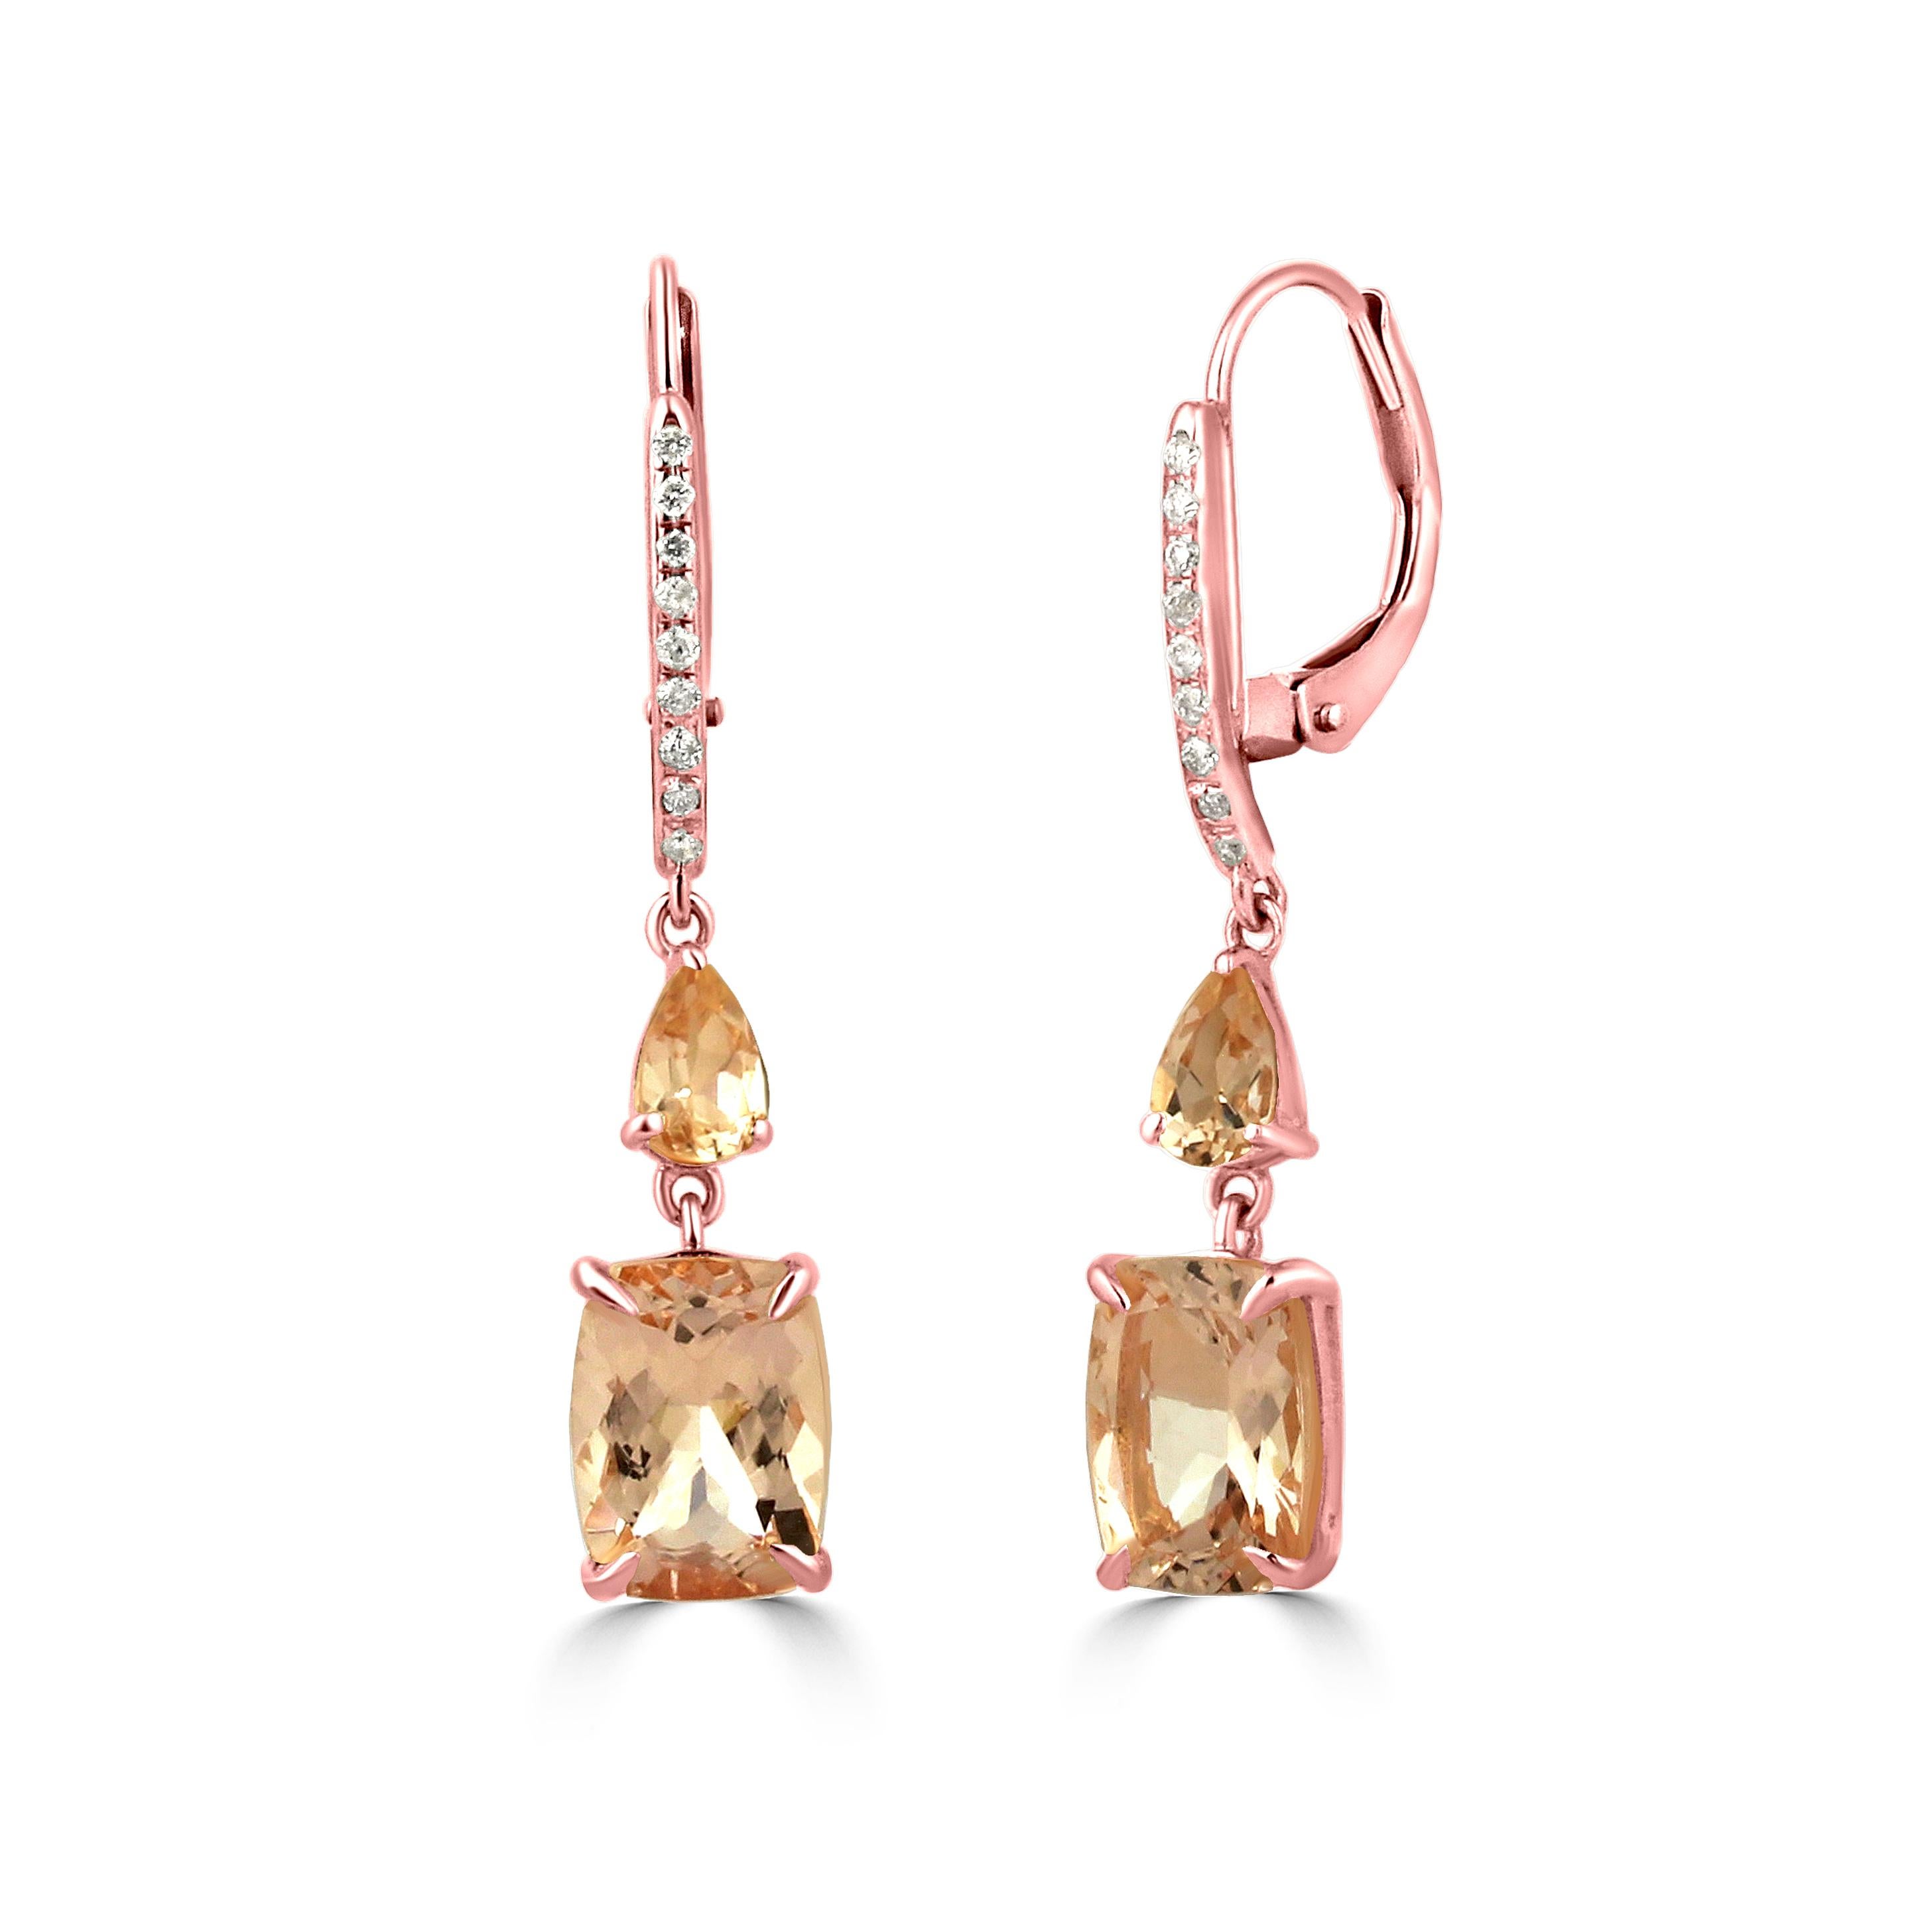 Set your sights on these Gemistry pretty pink gemstone drop earrings! 2.99 ct. t.w. cushion and pear cut exotic morganite drops sparkle from 14k rose gold leverbacks, highlighted by .07 ct. t.w. round brilliant cut diamonds. Morganite and diamond